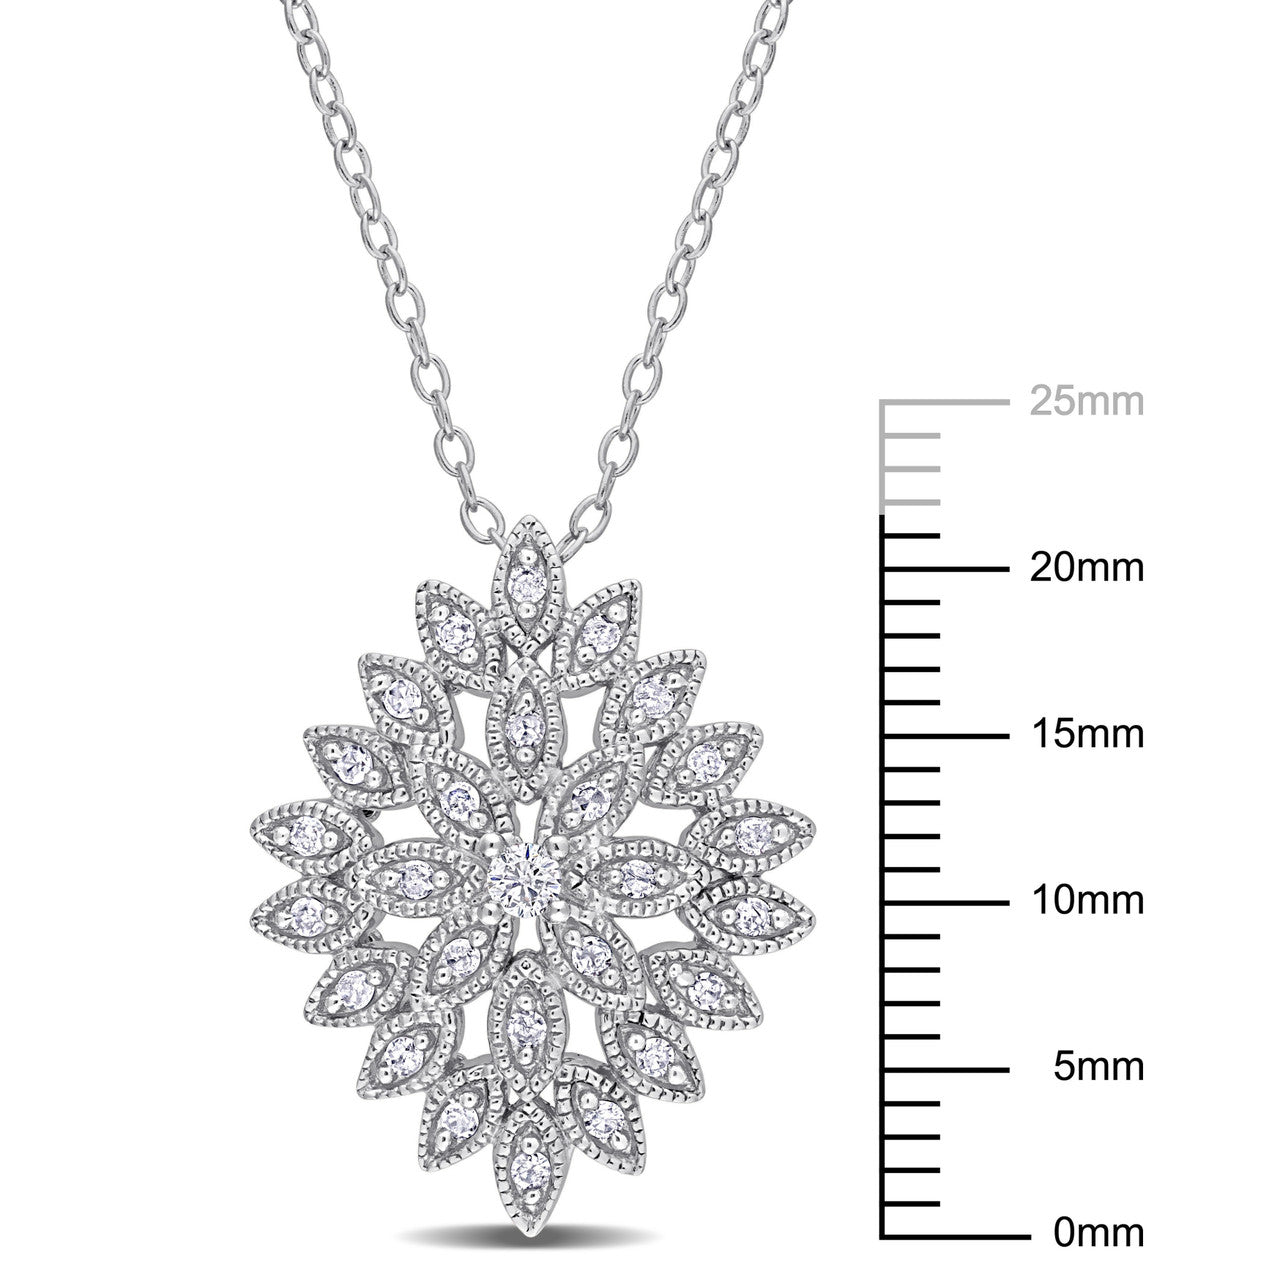 Ice Jewellery 1/4 CT Diamond Flower Pendant With Chain in Sterling Silver - 75000005723 | Ice Jewellery Australia